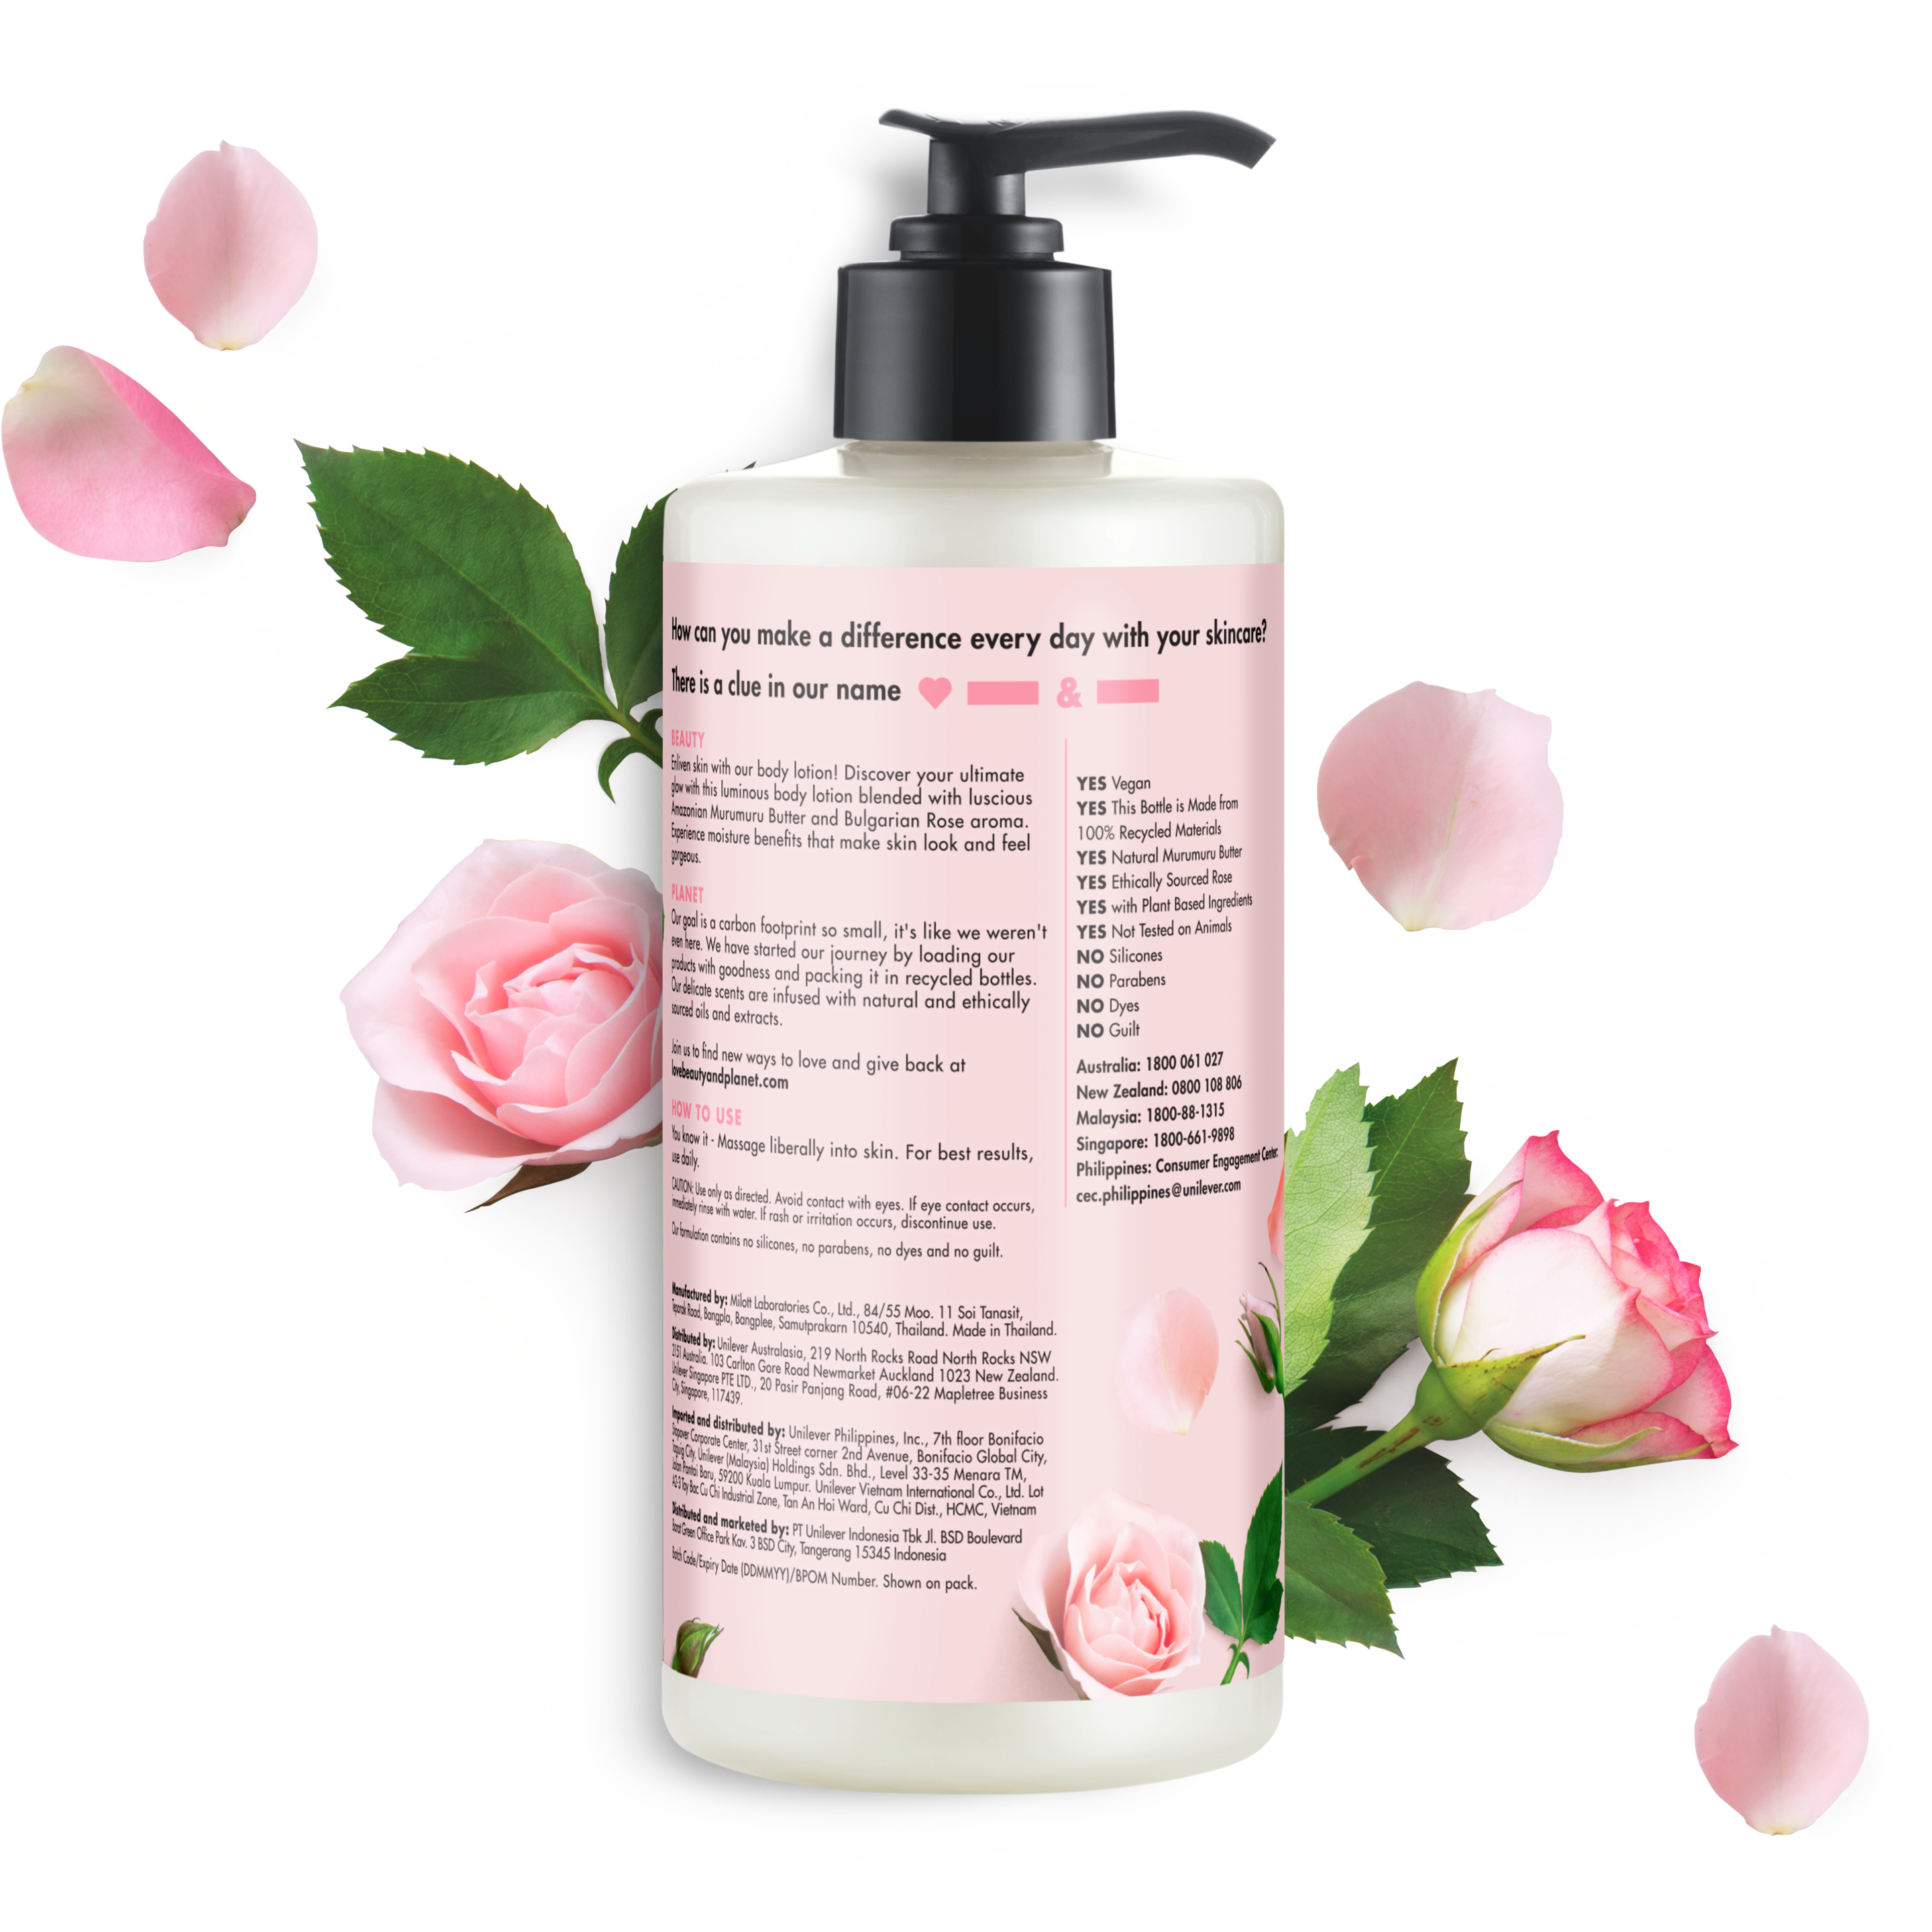 Back of body lotion pack Love Beauty Planet Murumuru Butter & Rose Body Lotion Delicious Glow 13.5ml